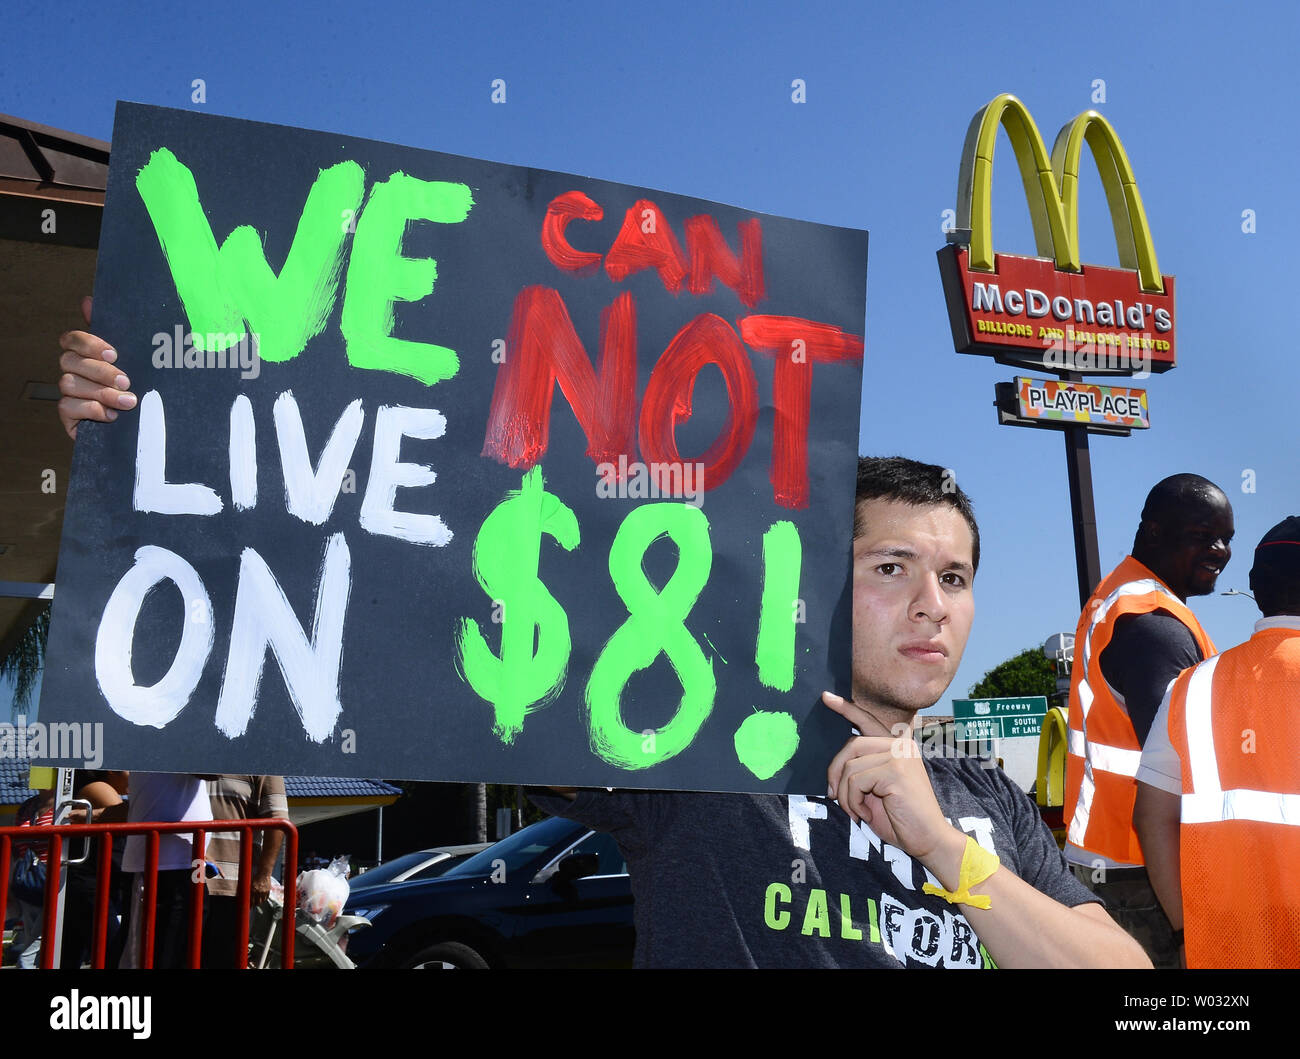 Fast food workers in the Los Angeles area began their first strike today, part of a nationwide attempt to raise the federal.minimum wage to $15 per hour and form a union. Organizers claim fast food workers are forced to rely on public assistance just to make ends meet.''  UPI/Jim Ruymen Stock Photo